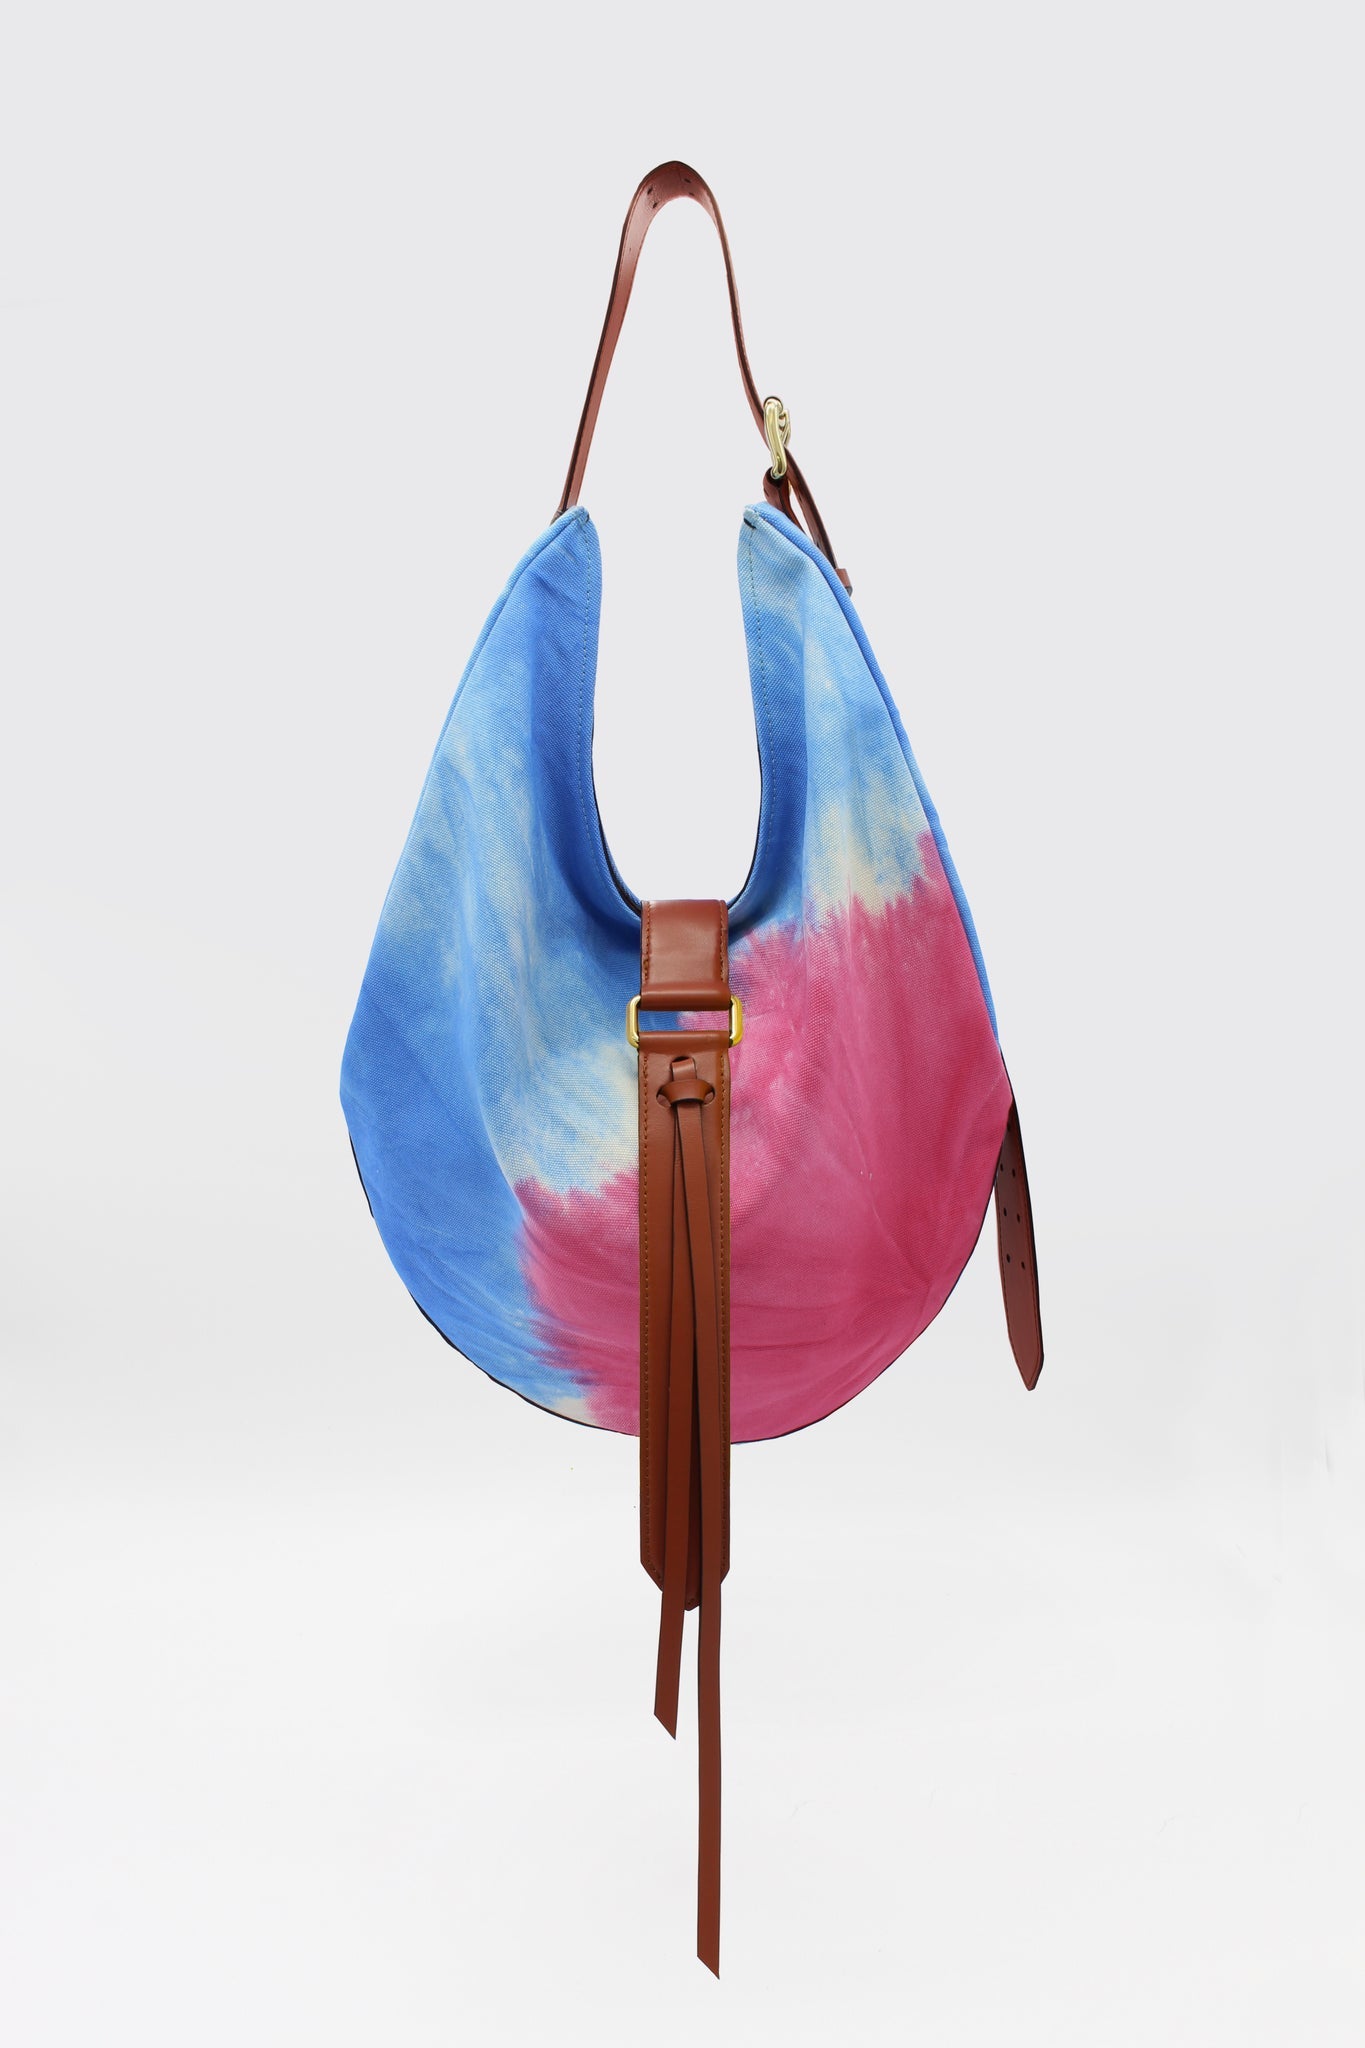 Sunset Bag Maxi Tie-dye Canvas blue+red